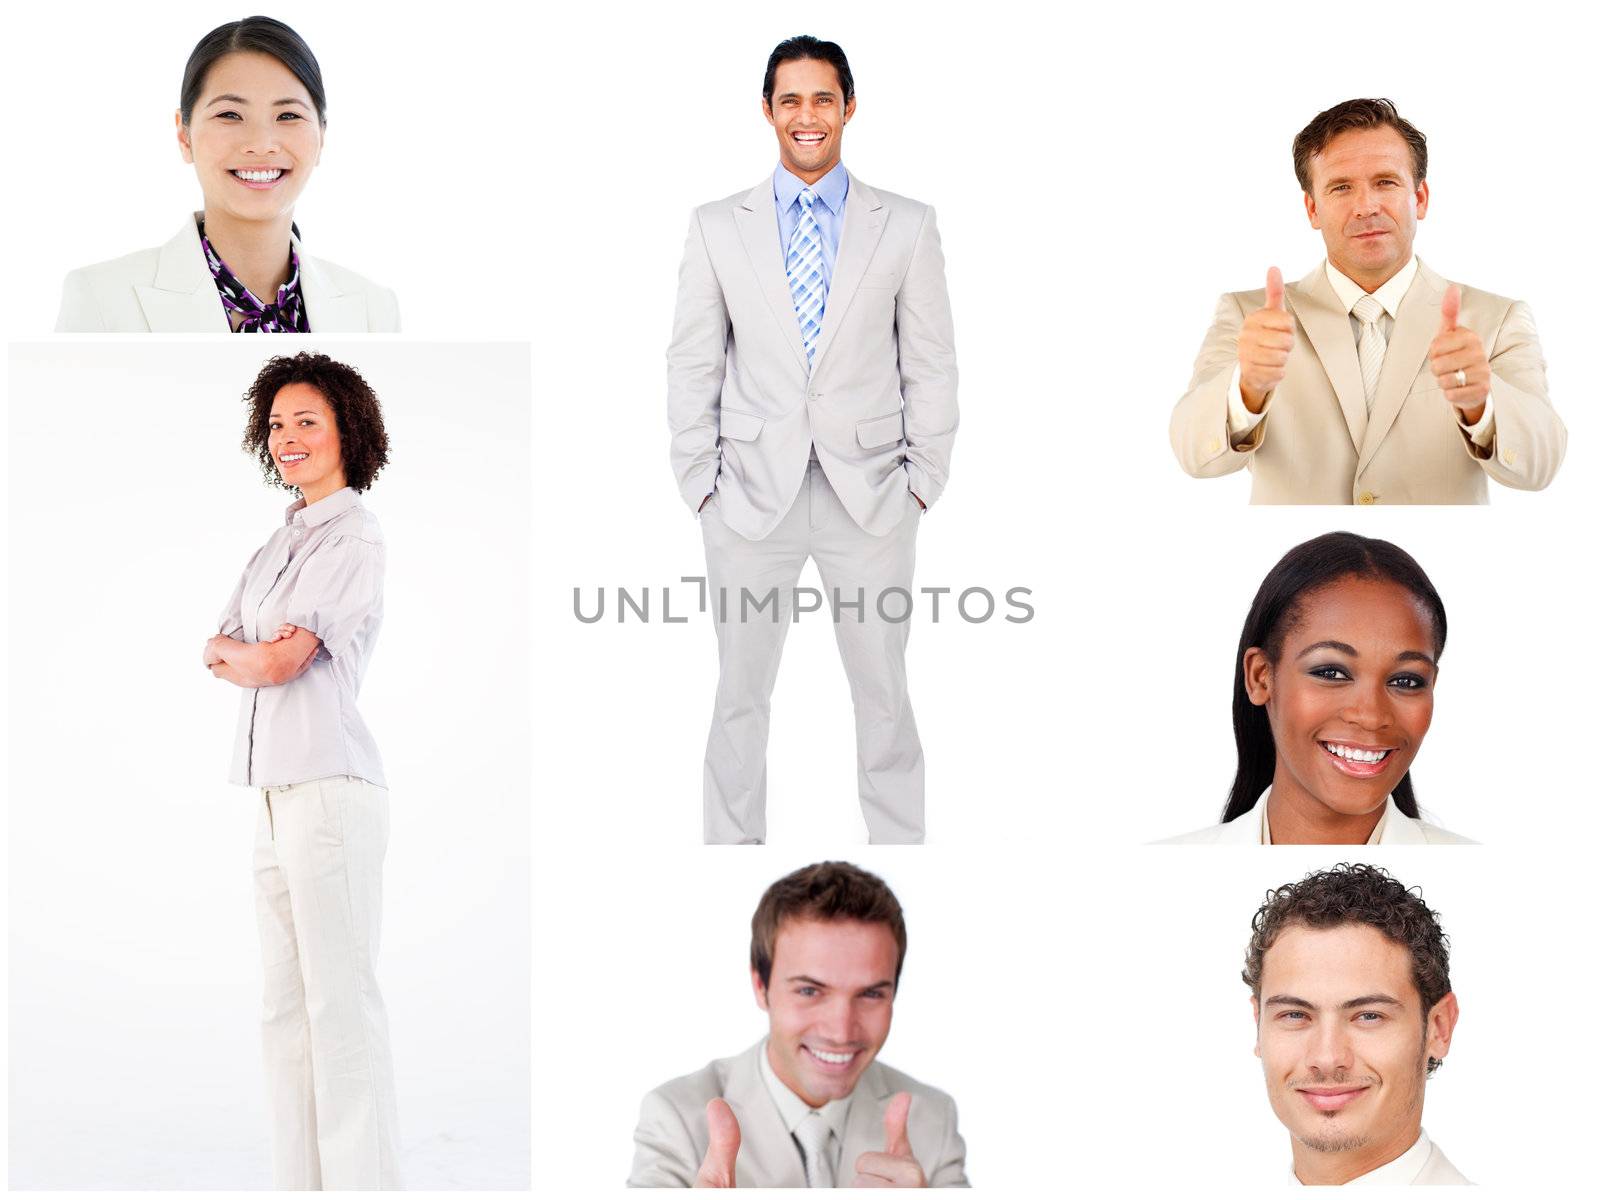 Collage of smilling business people by Wavebreakmedia